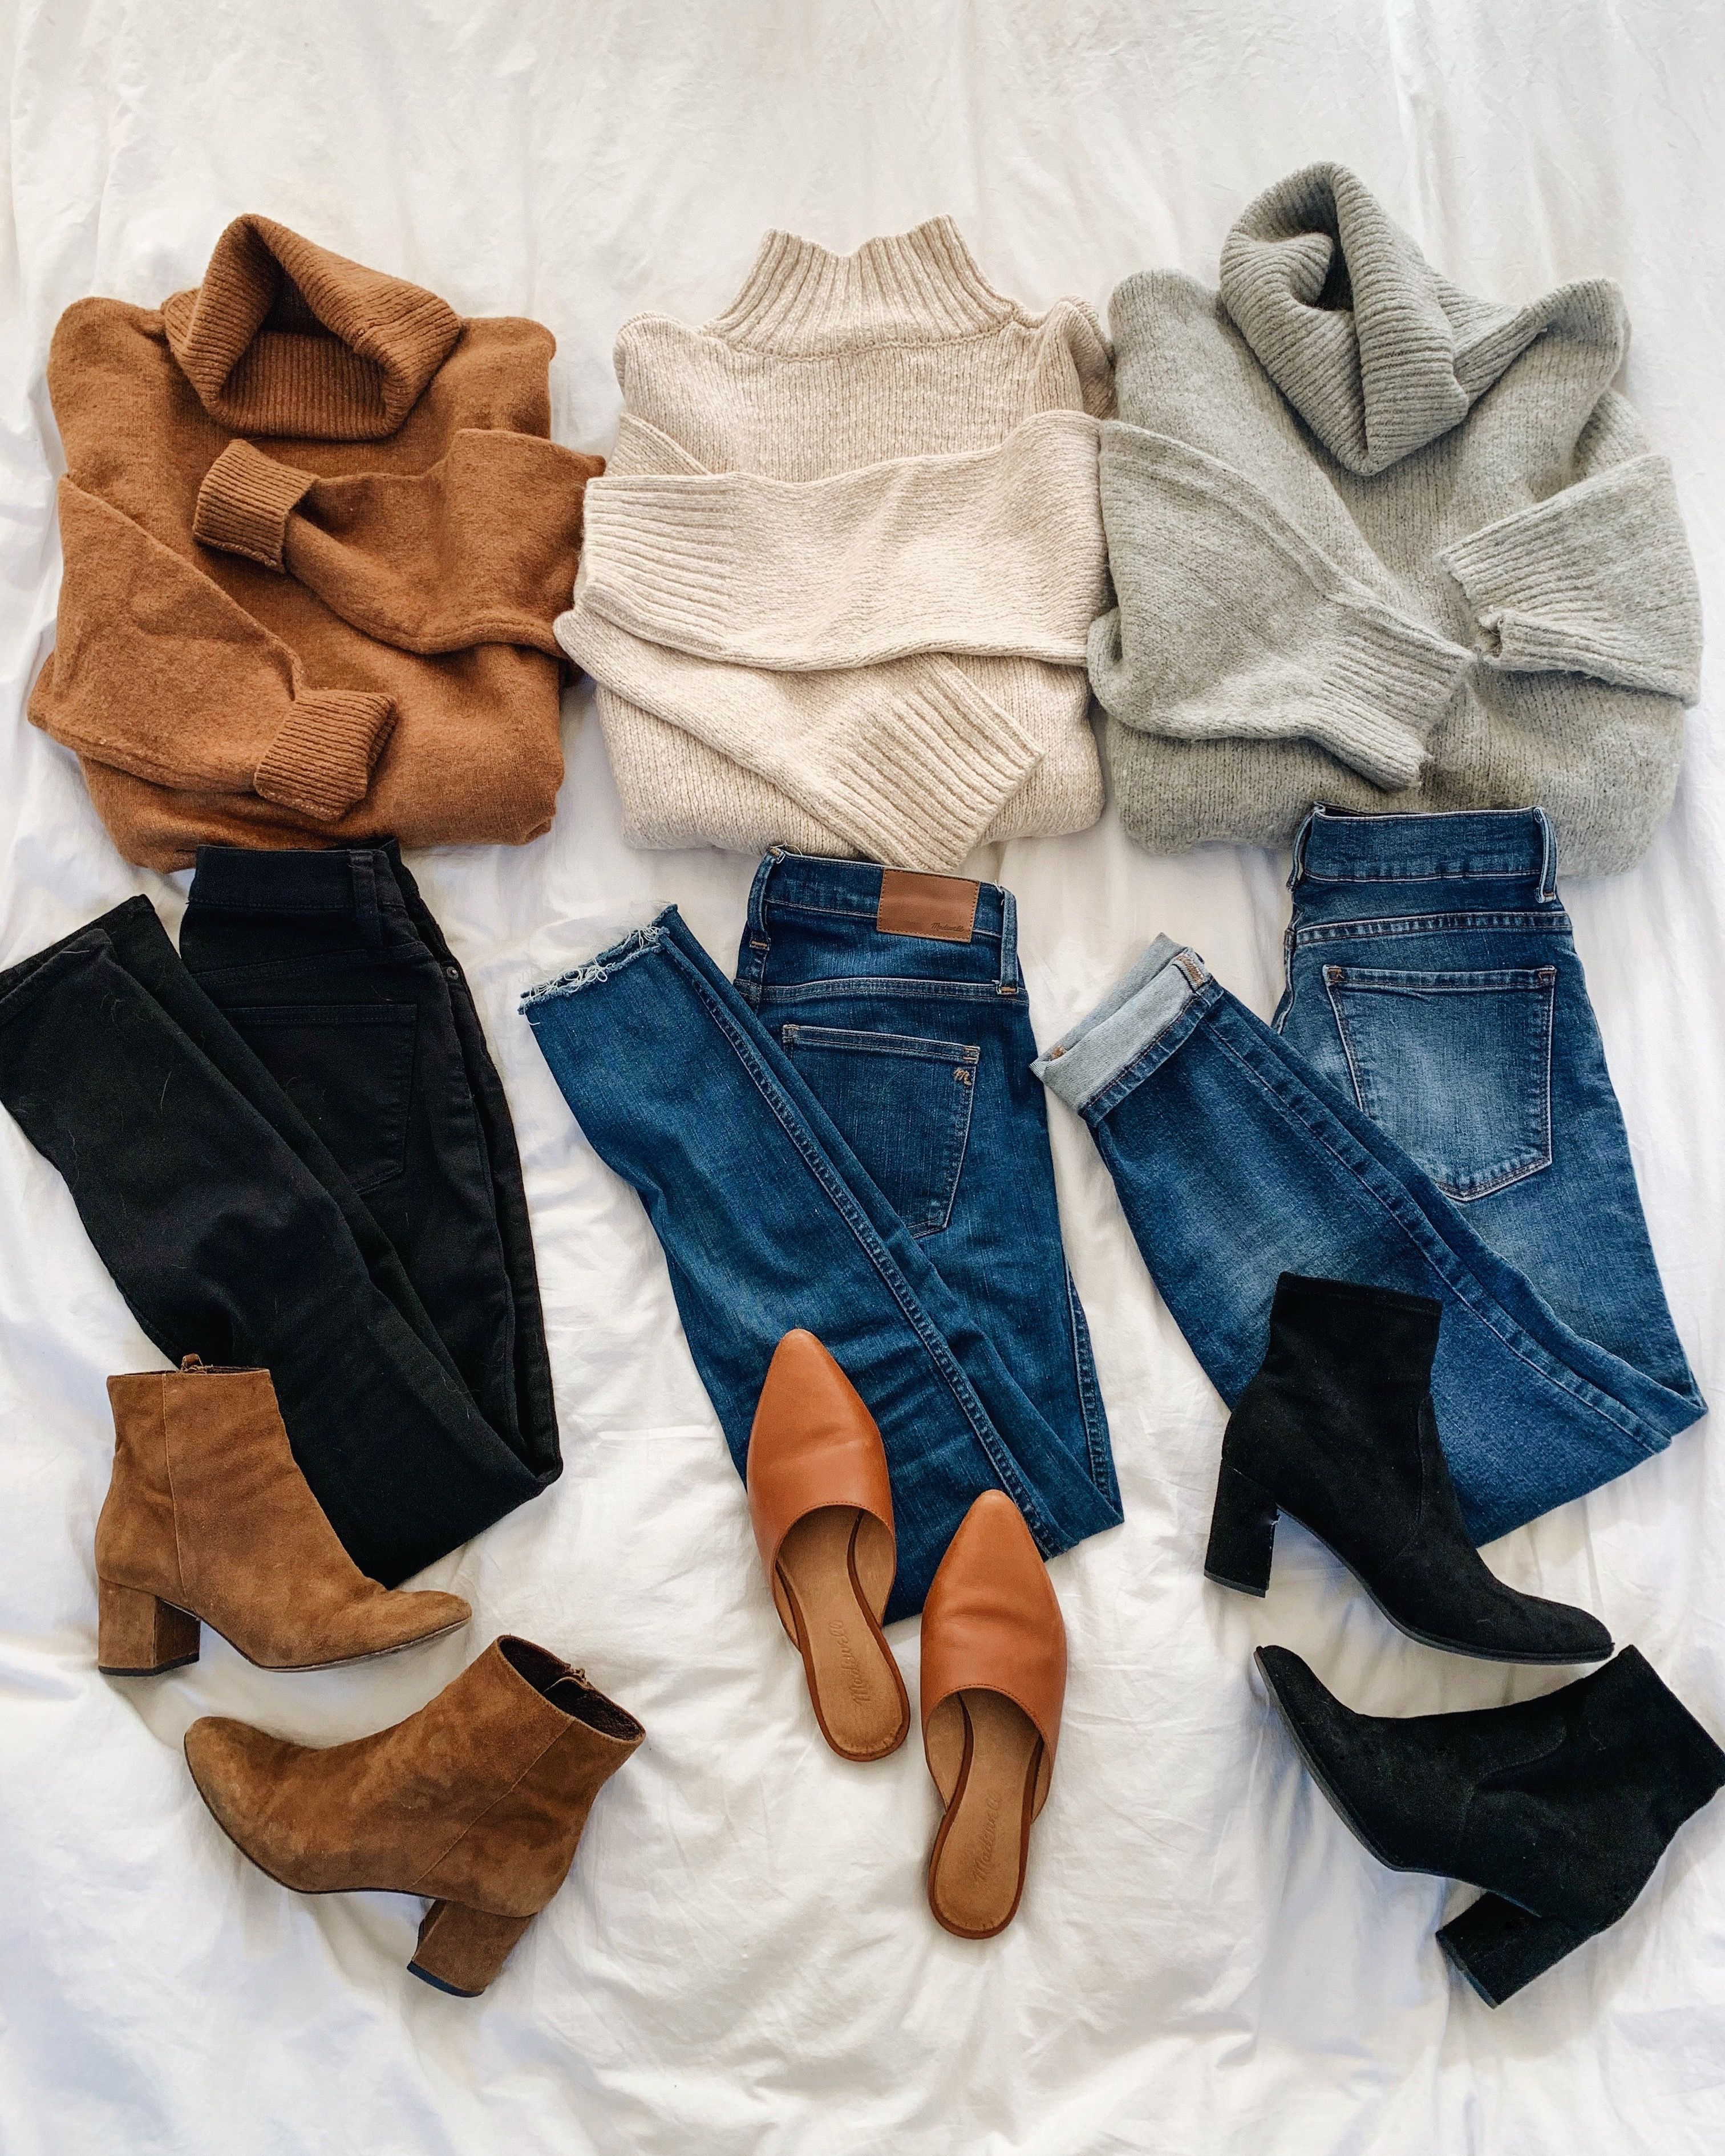 Lilly & Grant - Cozy Fall 2019 Outfits - Lilly & Grant - Cozy Fall 2019 Outfits -   12 everyday style 2019 ideas